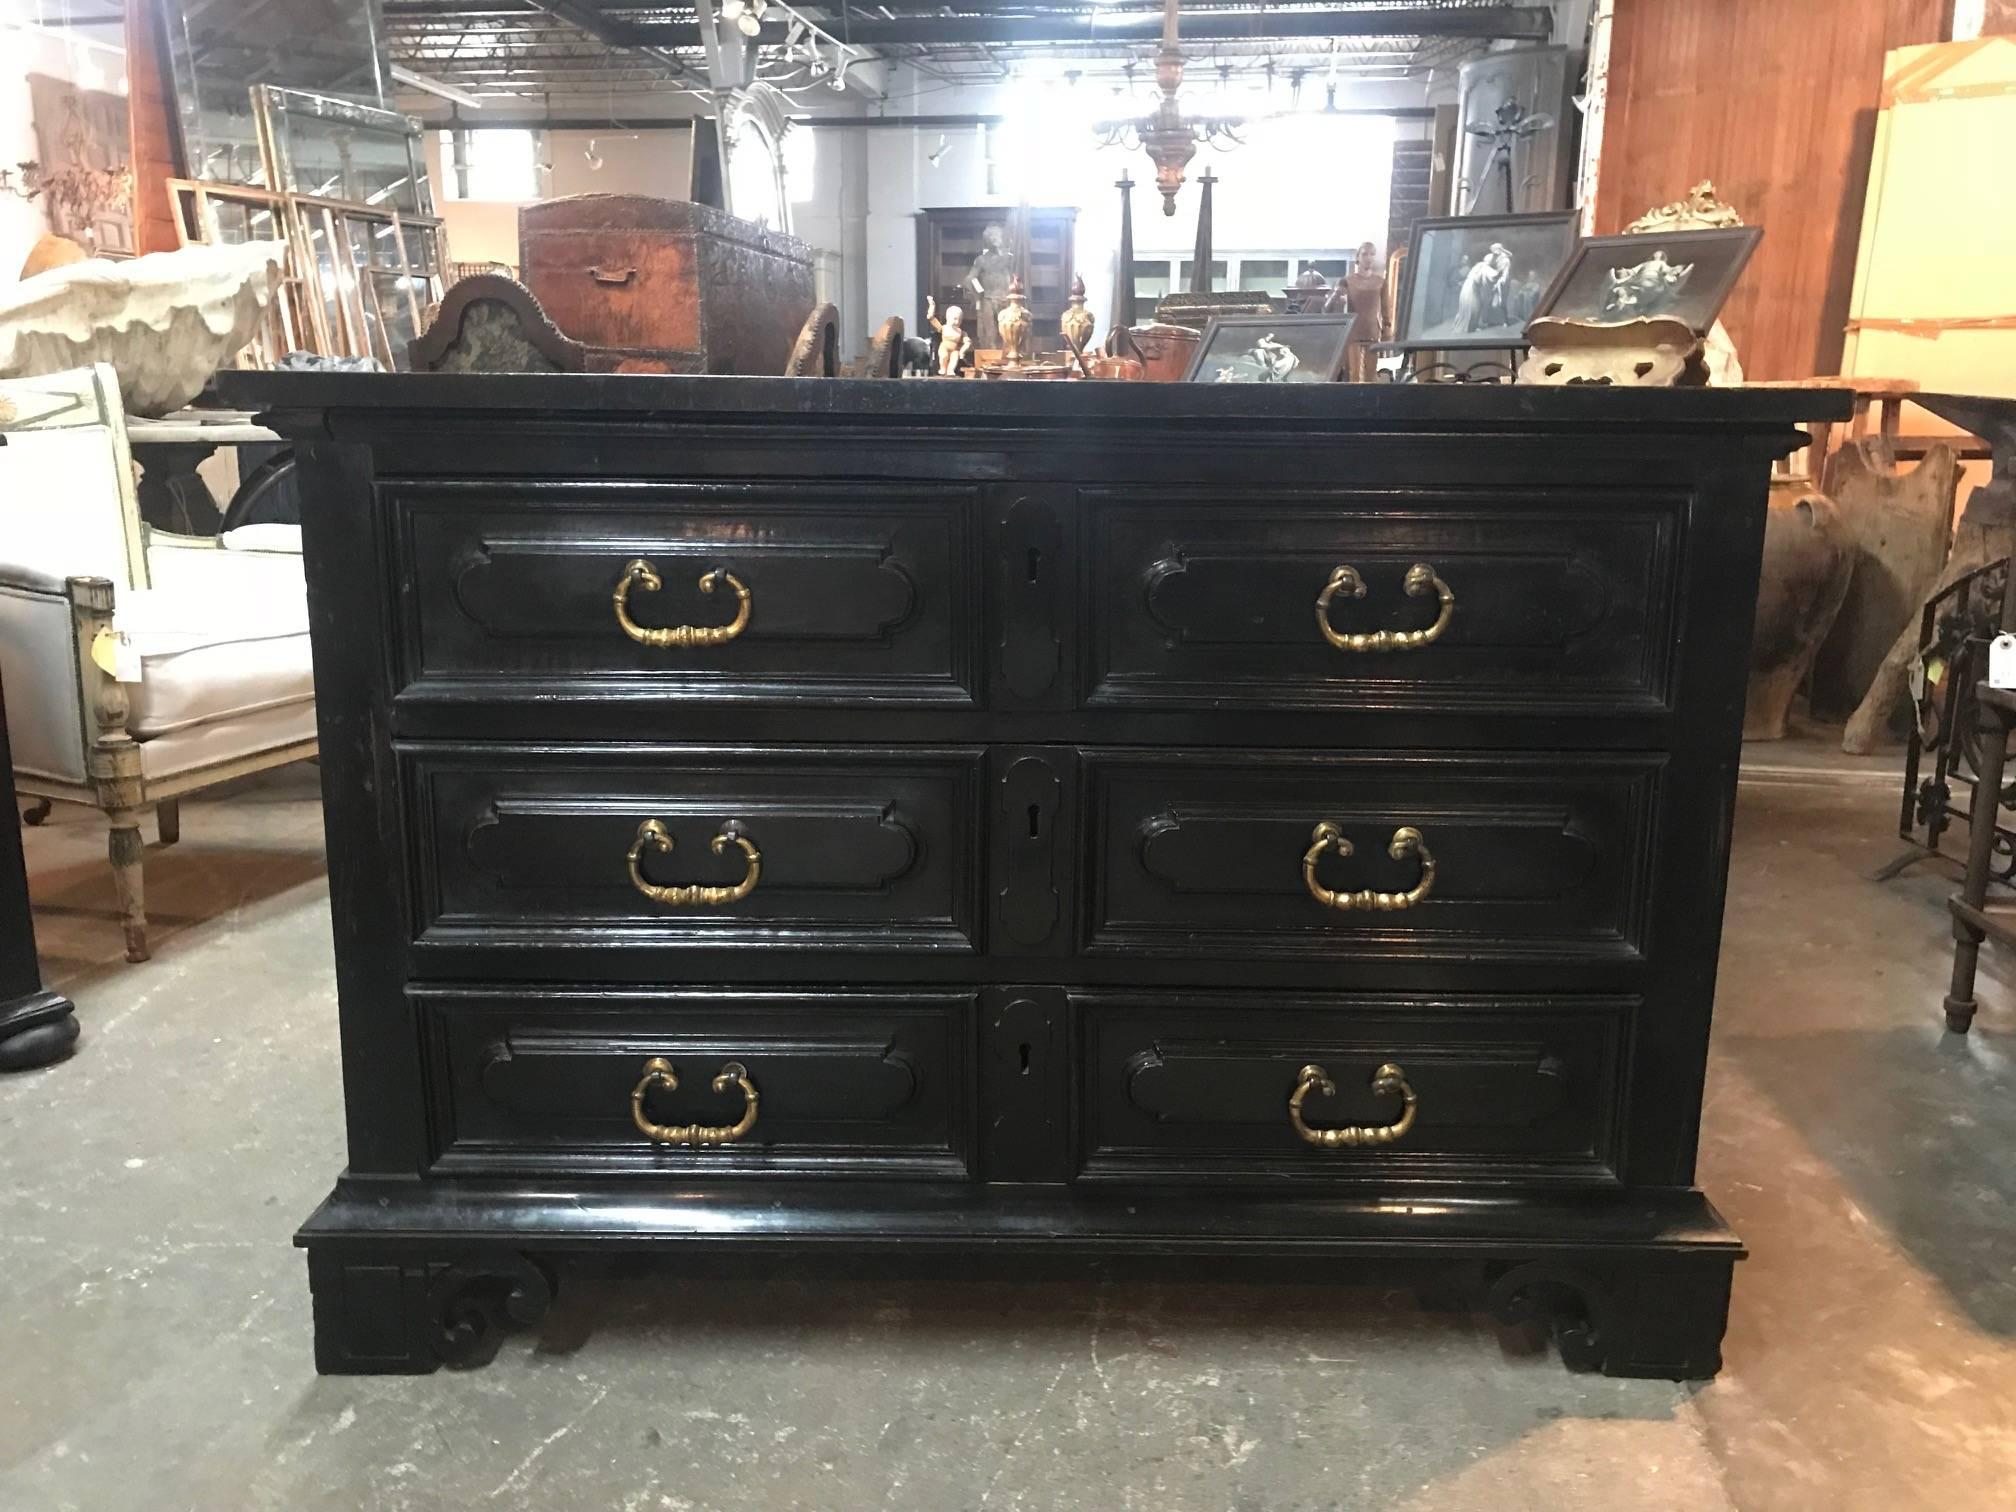 A very striking 18th century commode from the Lombardi region of Italy. Beautifully constructed with its original ebonized finish. Three molded drawer fronts with conforming apron and sculpted bracket feet. The commode has a pull out board for